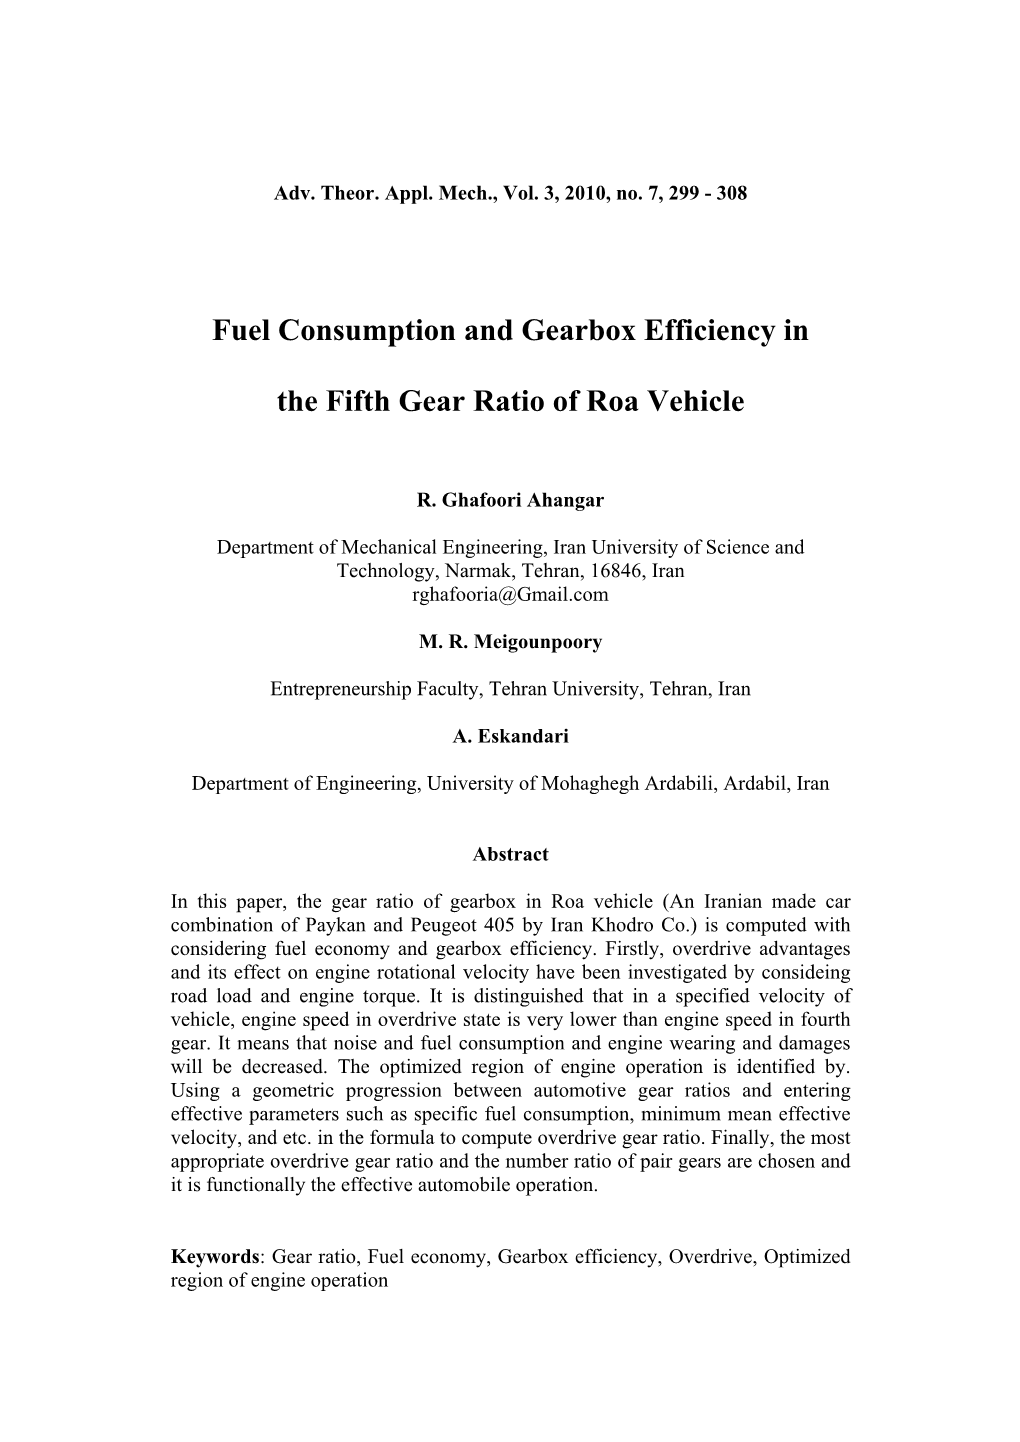 Fuel Consumption and Gearbox Efficiency in the Fifth Gear